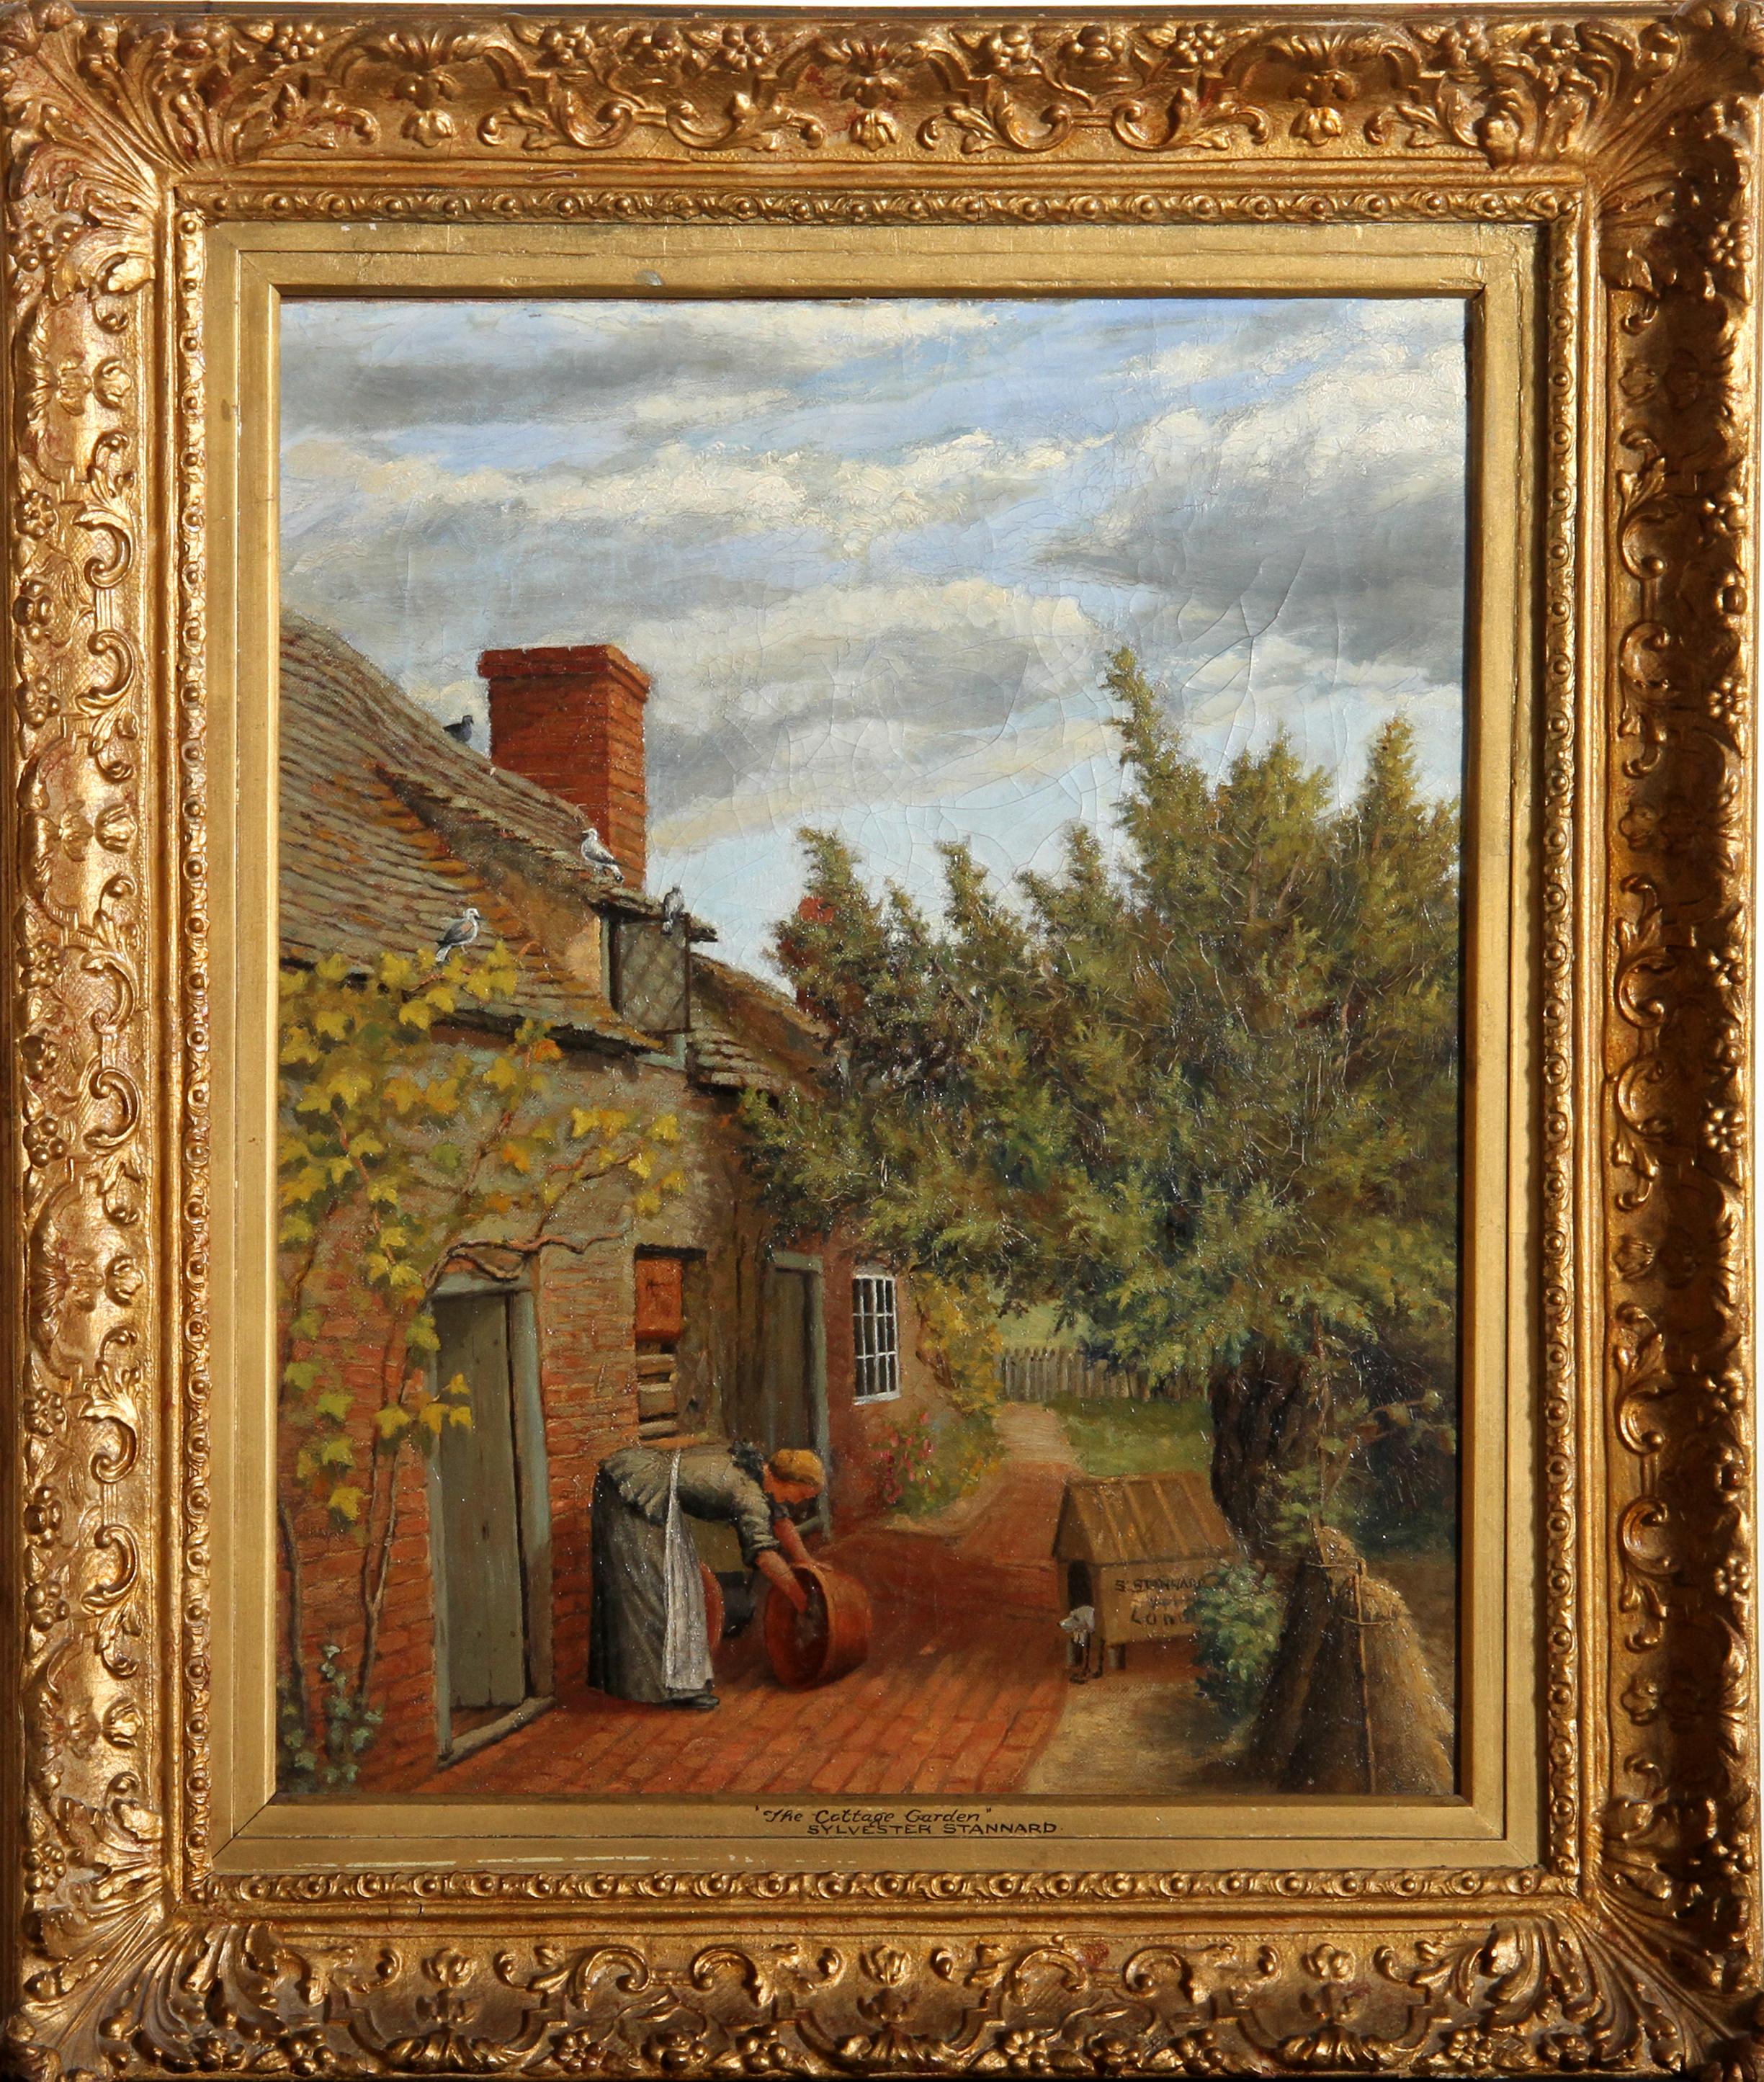 A neoclassical oil painting on canvas by British artist Henry John Sylvester Stannard. The scene depicts a woman cleaning a bucket outside her house while a dog nestled in a dog house watches on. The painting is signed by the artist as “Sylvester